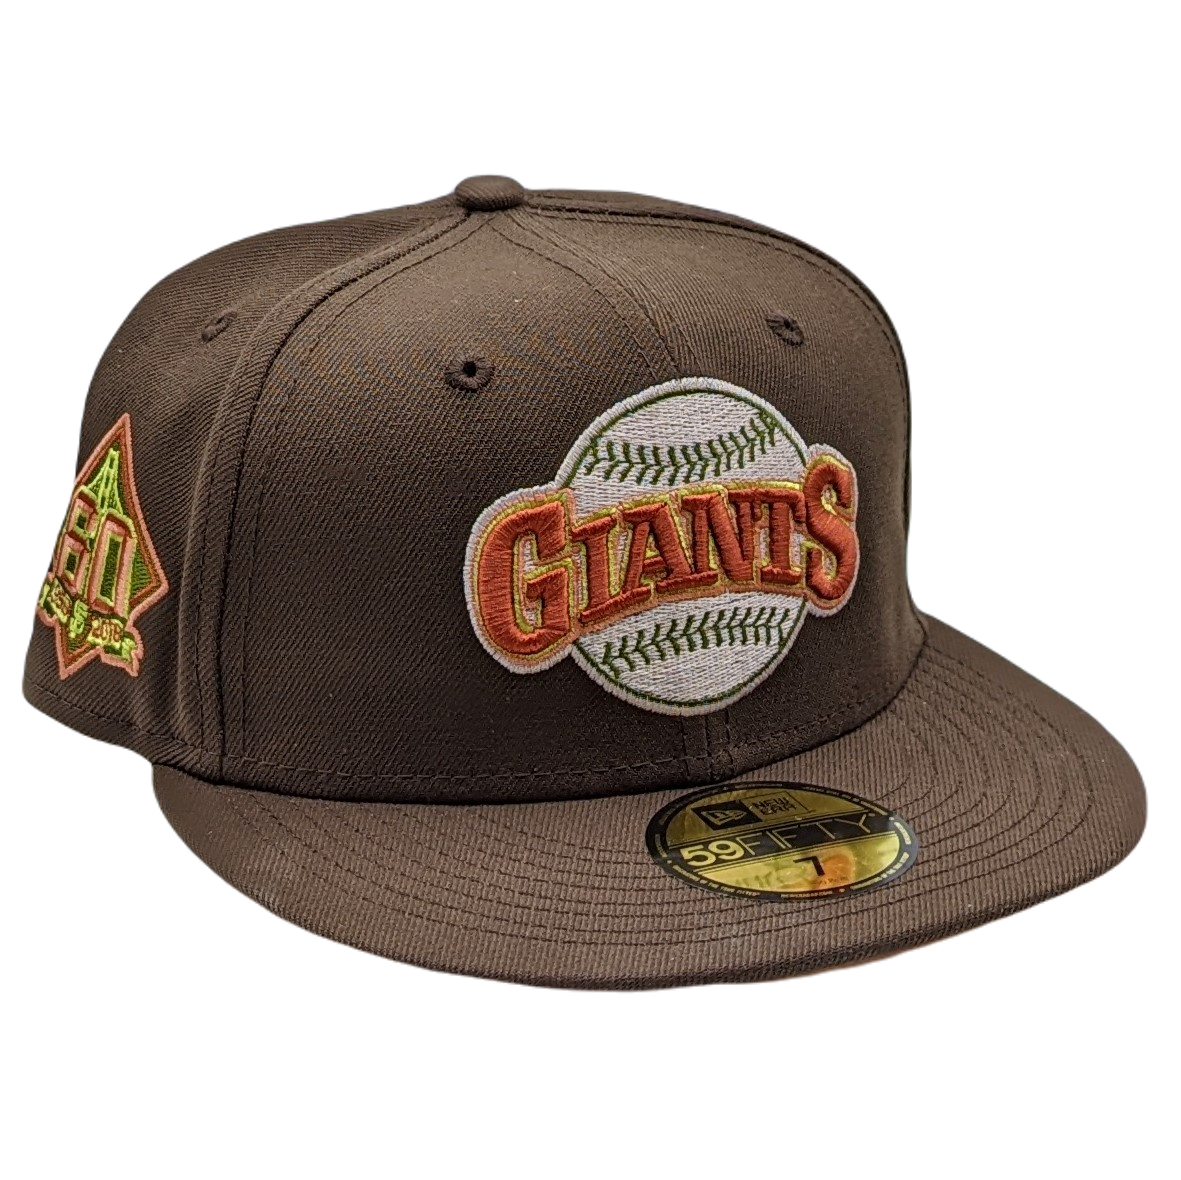 San Francisco Giants Baseball Fitted 59Fifty Hat Size 7 brown